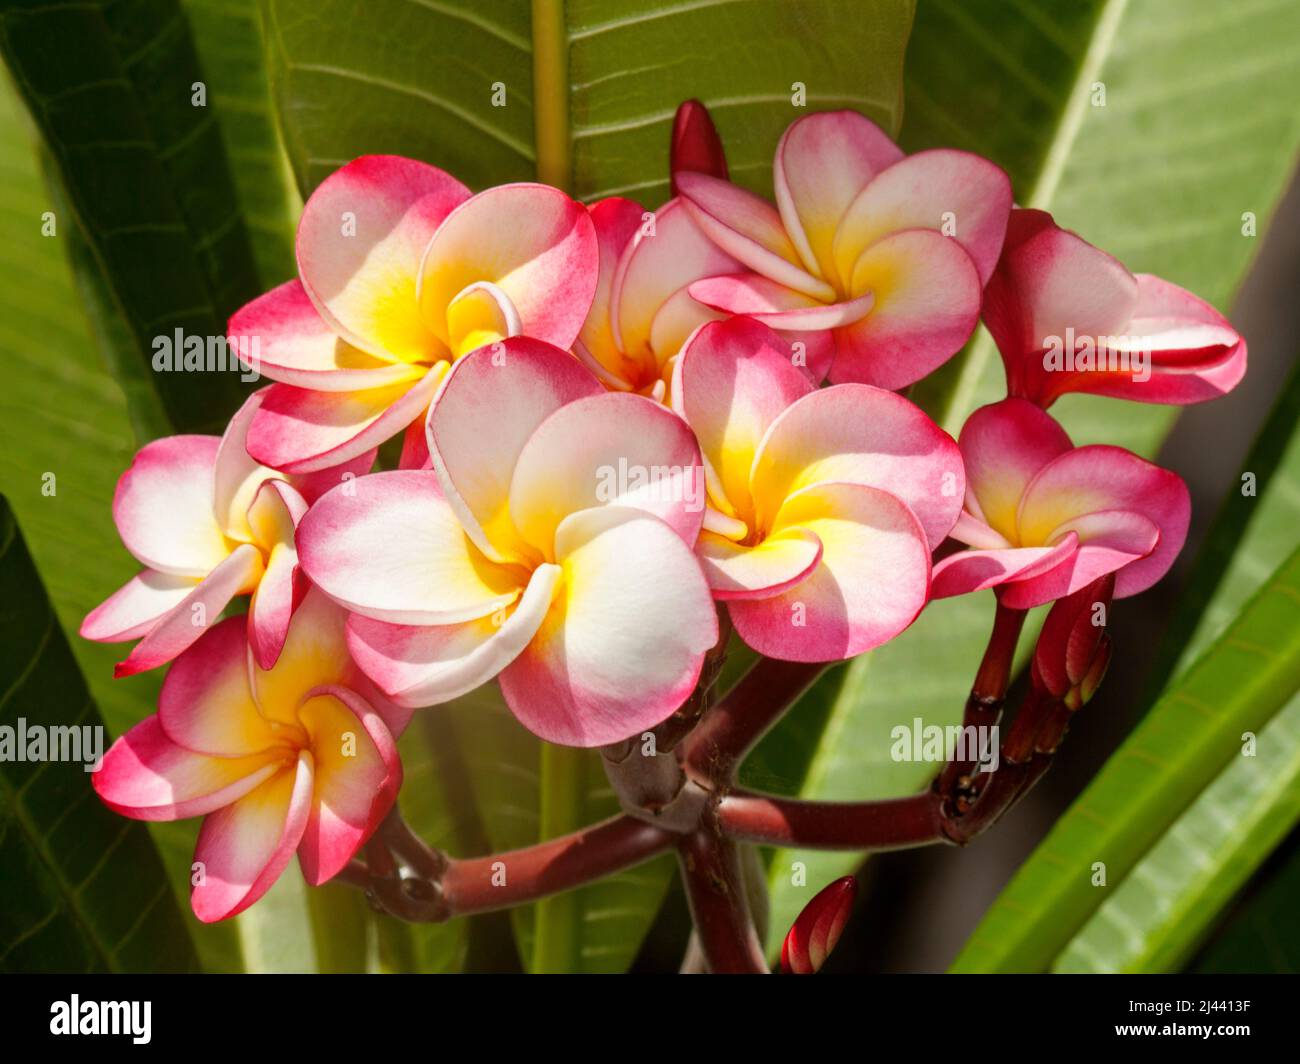 Cluster of spectacular, unusual vivid red, white and yellow perfumed Frangipani flowers, Plumeria rubra 'Danai Delight', on background of green leaves Stock Photo